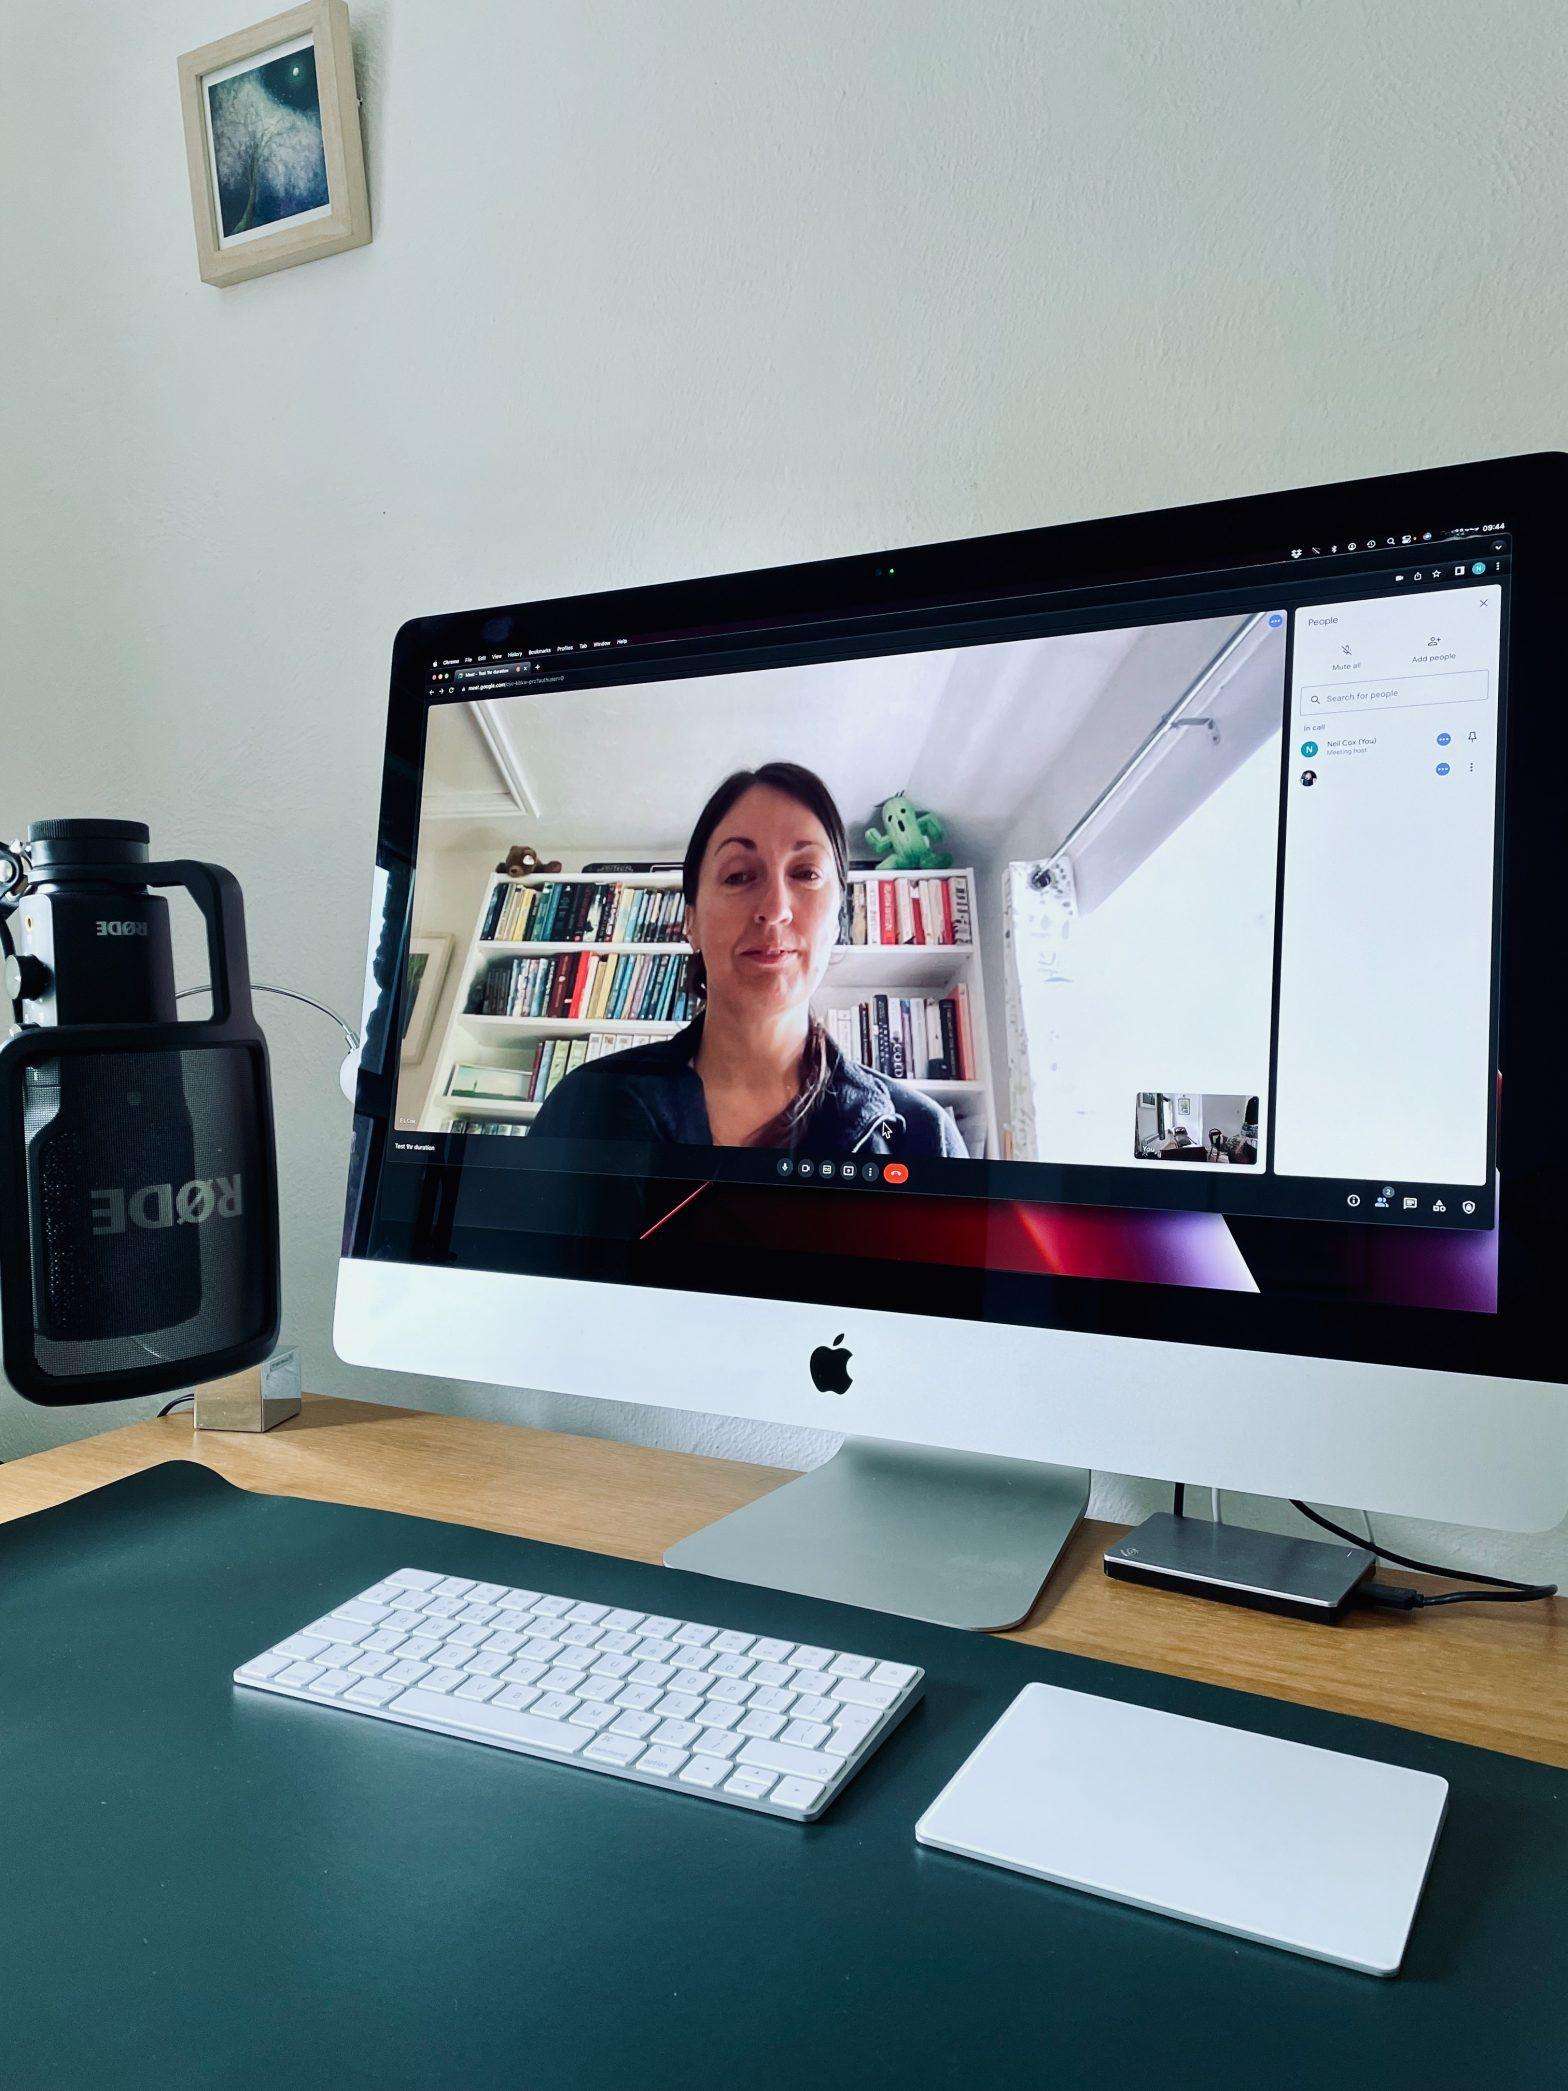 How to join an online meeting with me